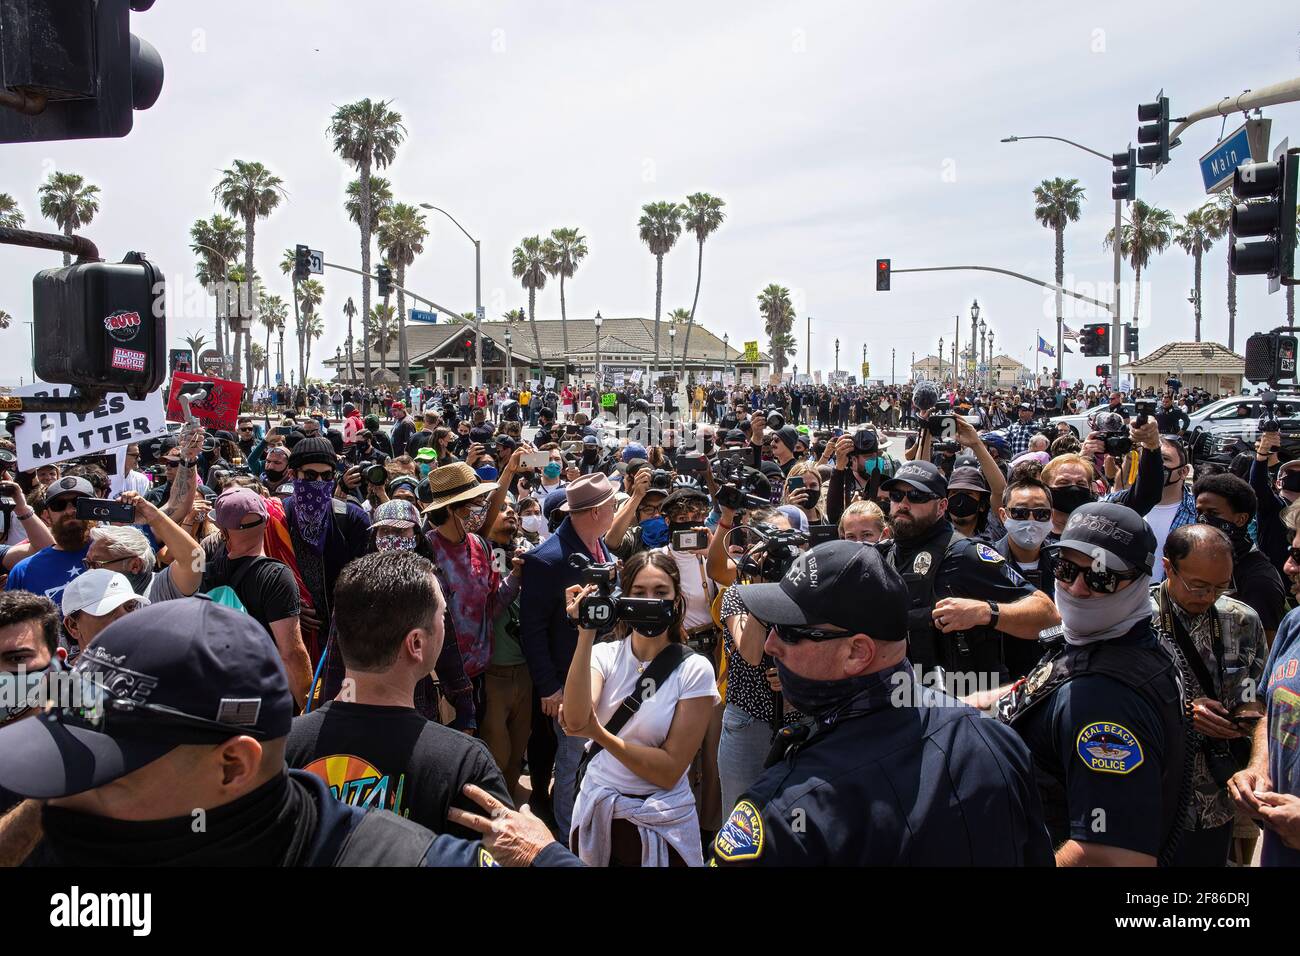 Huntington Beach, United States. 11th Apr, 2021. Crowds of protesters and counter-protesters gather in front of the Huntington Beach Pier during the demonstration. Upon word spreading amongst various social media and messaging platforms that there was to be a 'White Lives Matter' protest at the Huntington Beach Pier at 1pm, a large group of counter protesters arrived at the pier to stop the 'White Lives Matter' protest. The day resulted to clashes between counter protesters and white lives matter protesters both verbal and physical. Credit: SOPA Images Limited/Alamy Live News Stock Photo